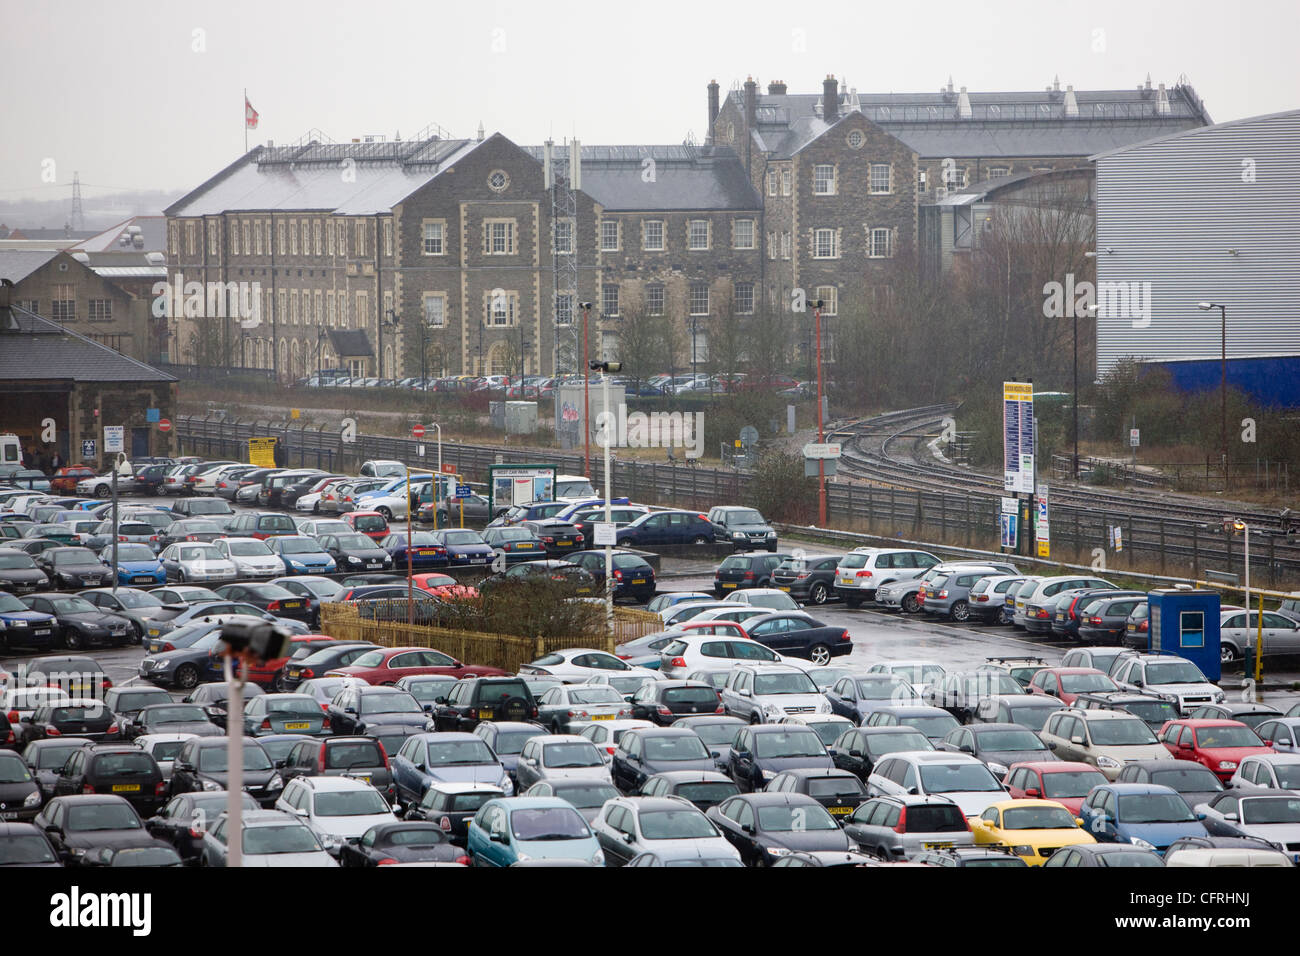 Large car park full of cars parked in front of the headquarters of English Heritage in Swindon, Wiltshire Stock Photo